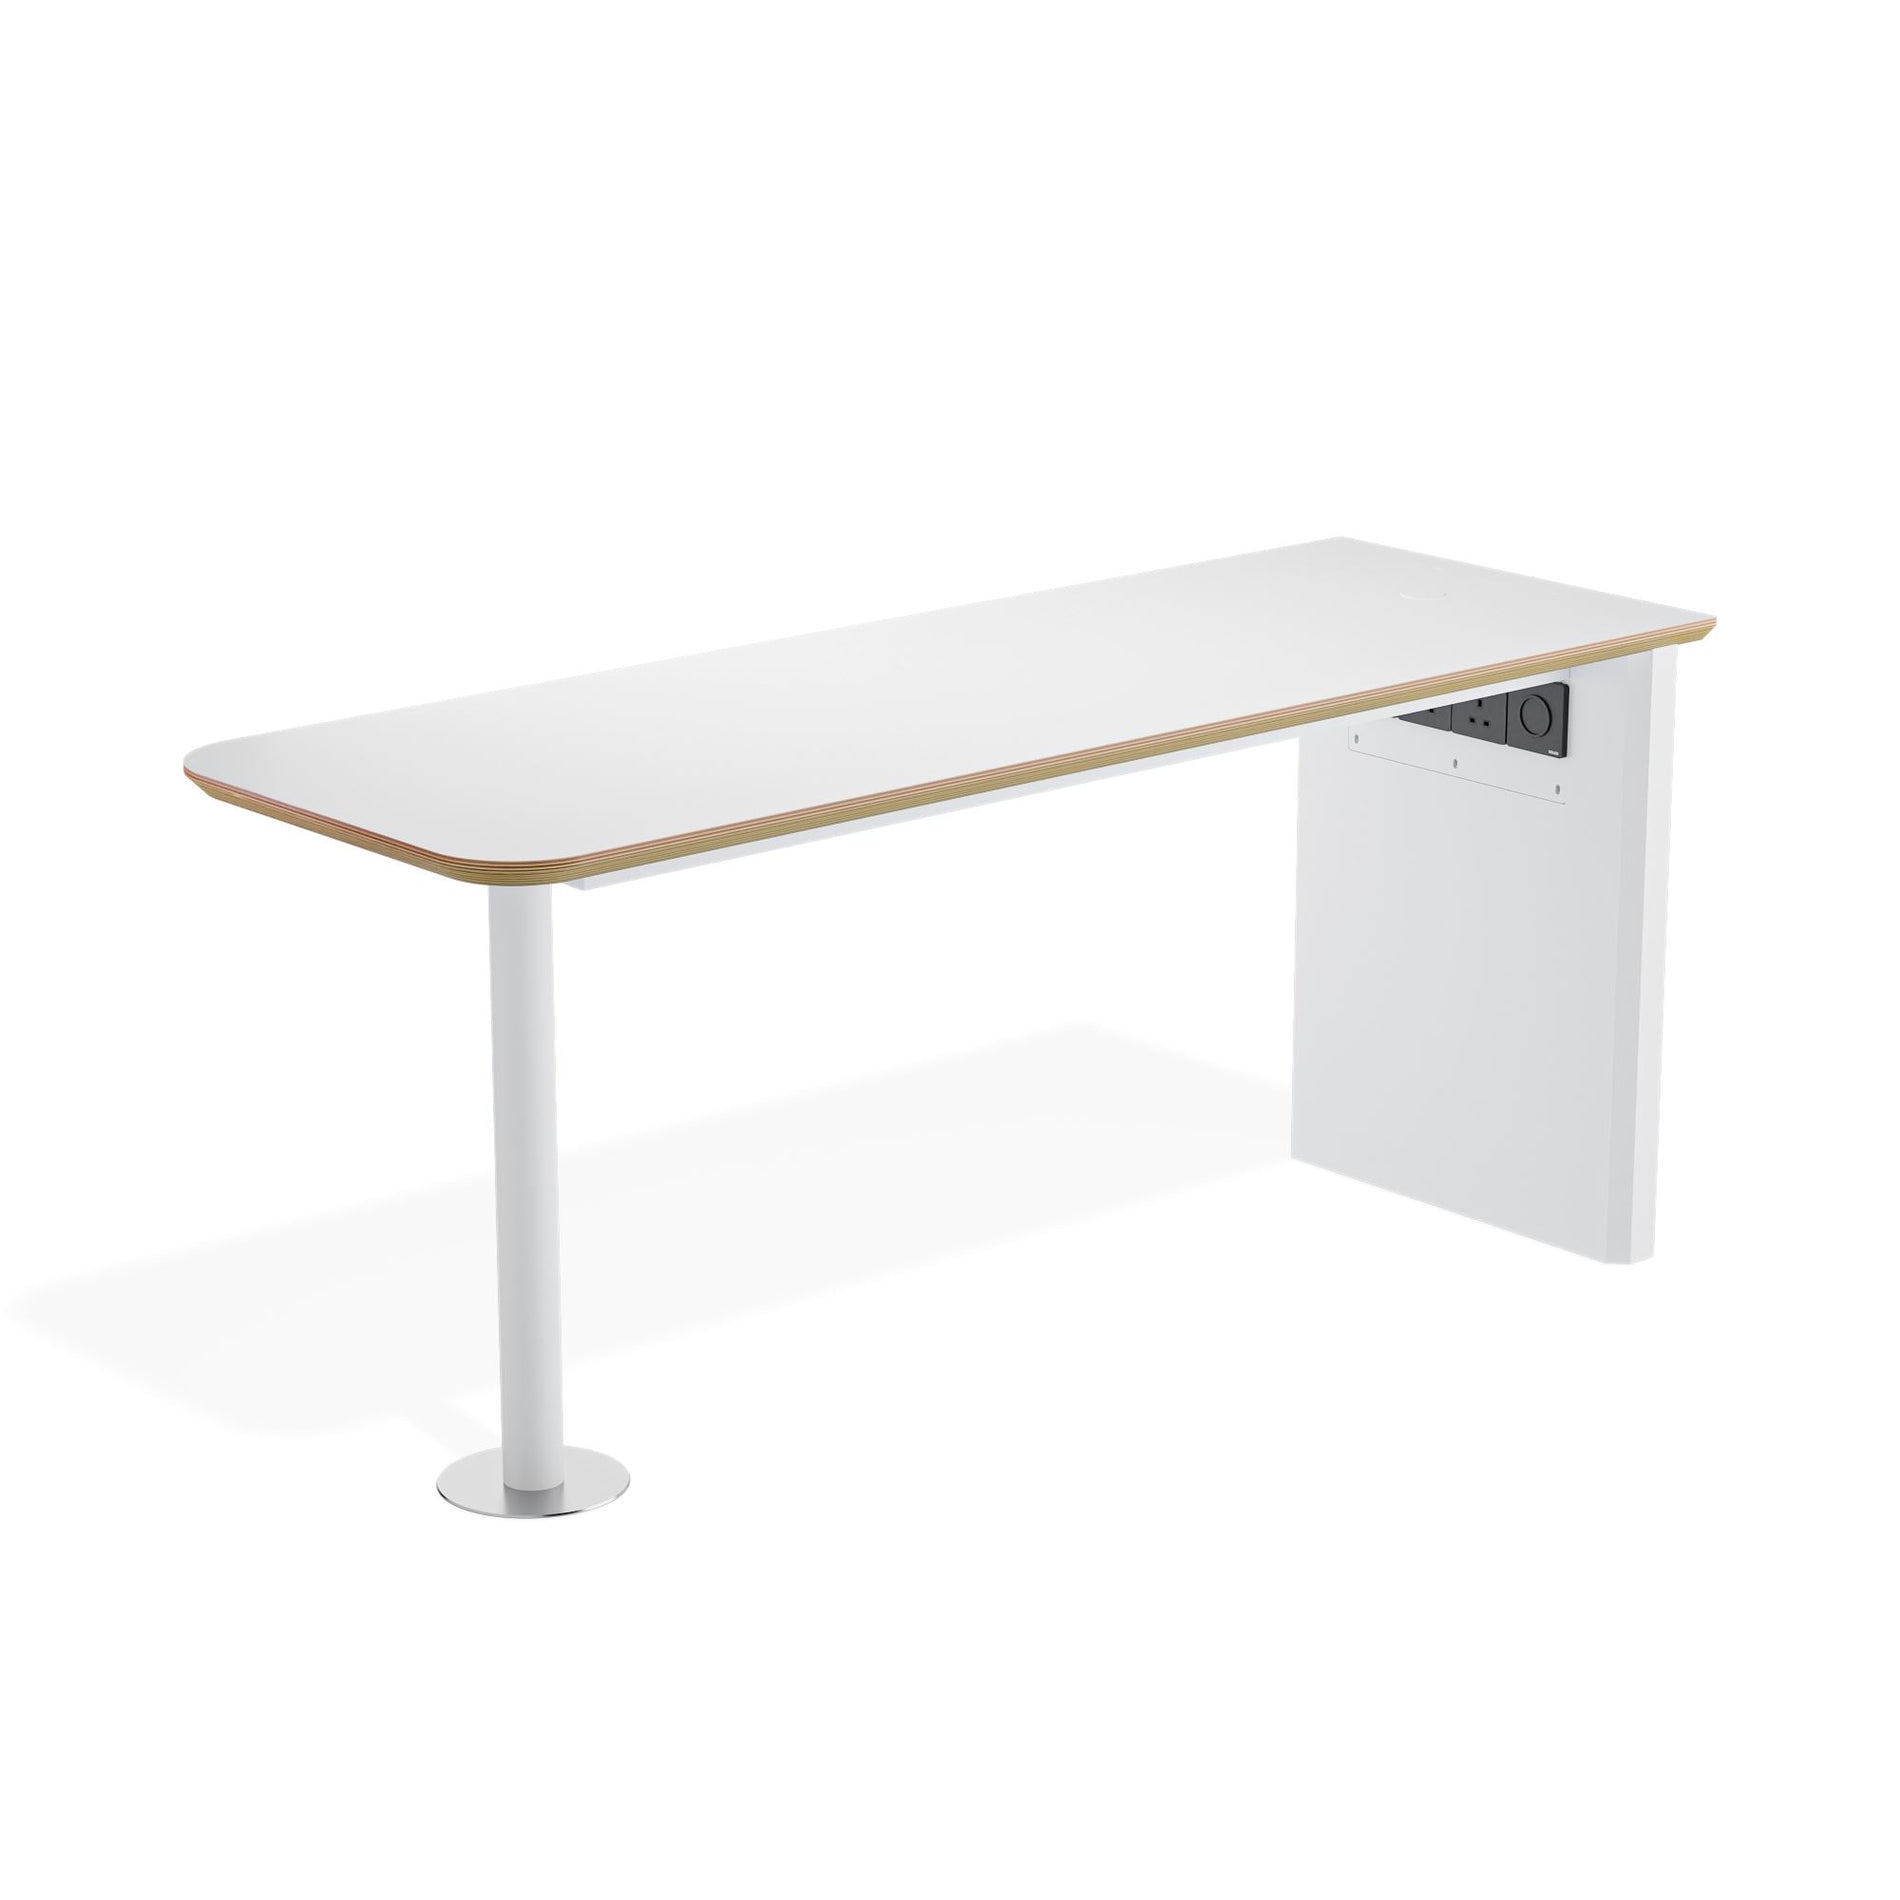 Quell Furniture of Meeting Booth - 6 PersonTable